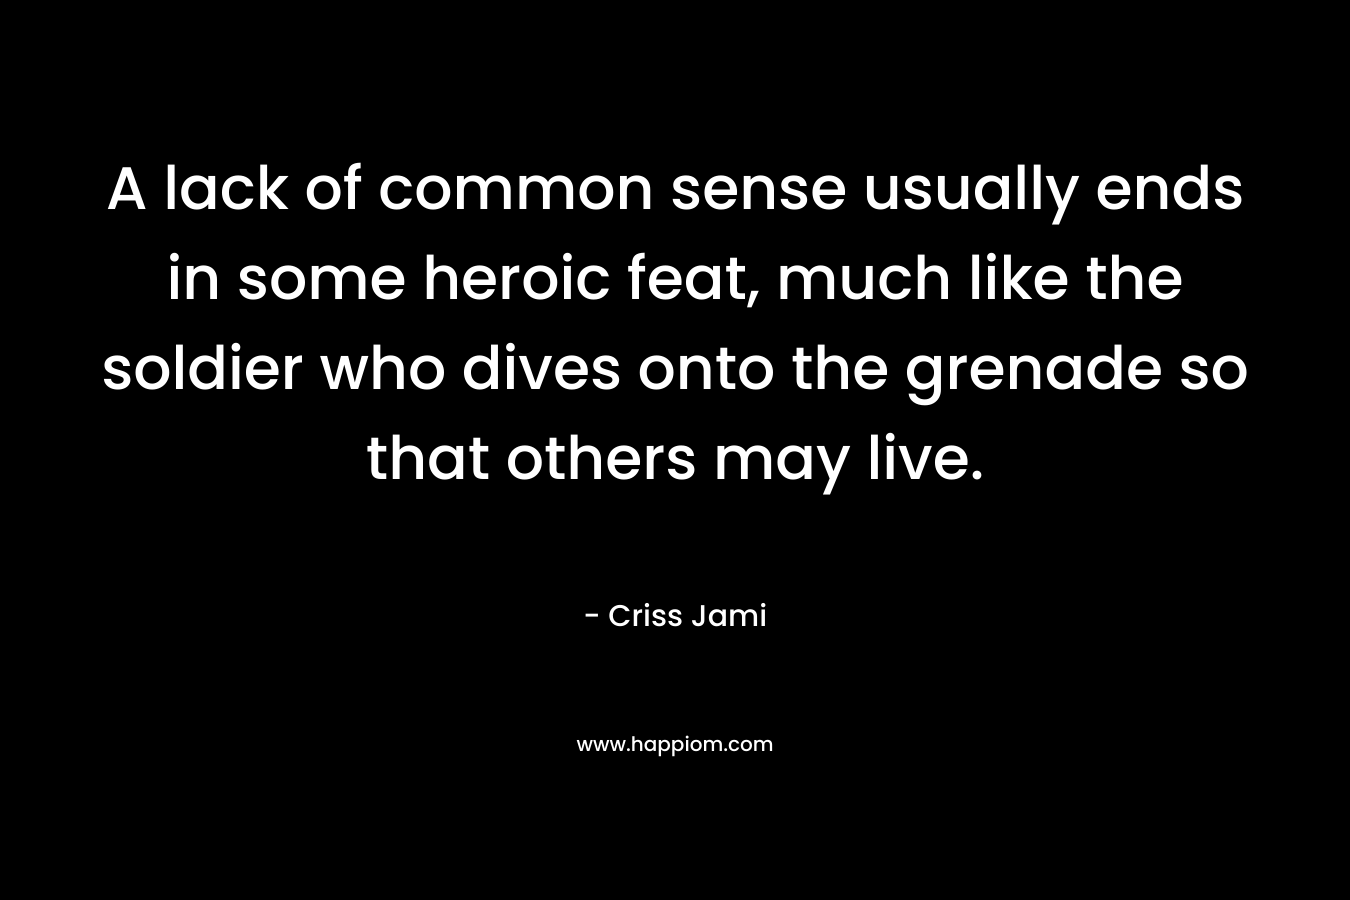 A lack of common sense usually ends in some heroic feat, much like the soldier who dives onto the grenade so that others may live. – Criss Jami